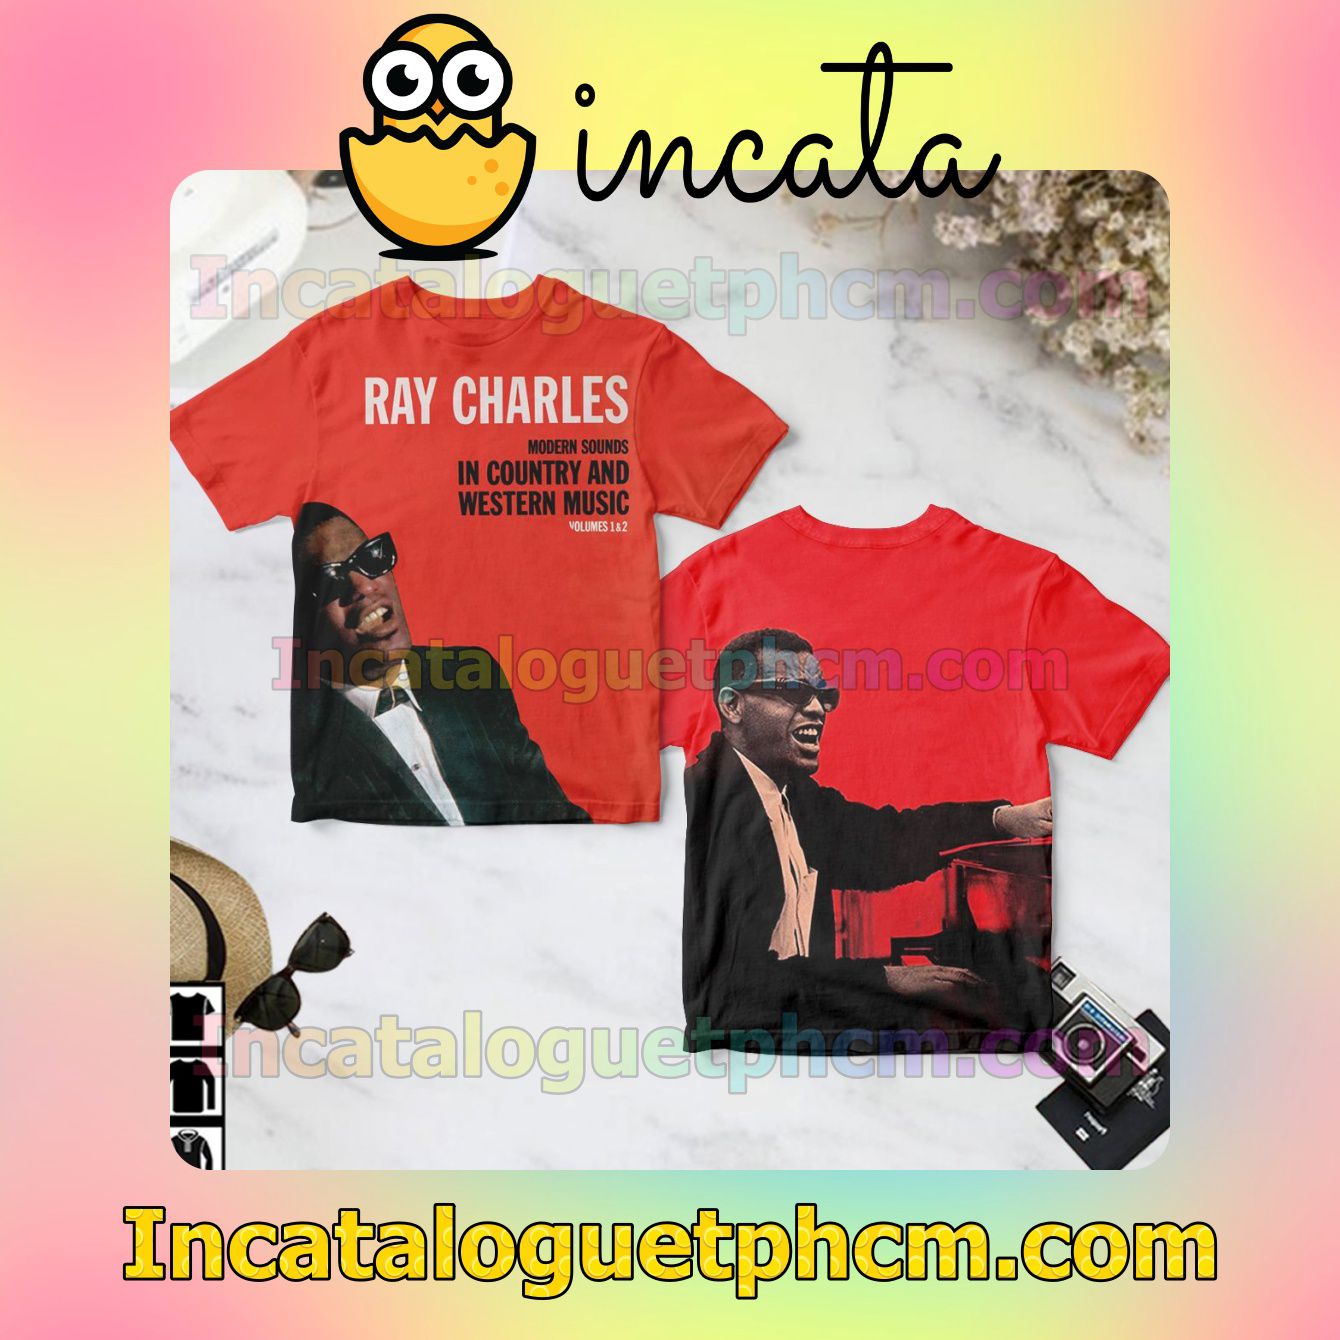 Ray Charles Modern Sounds In Country And Western Music Album Cover Gift Shirt